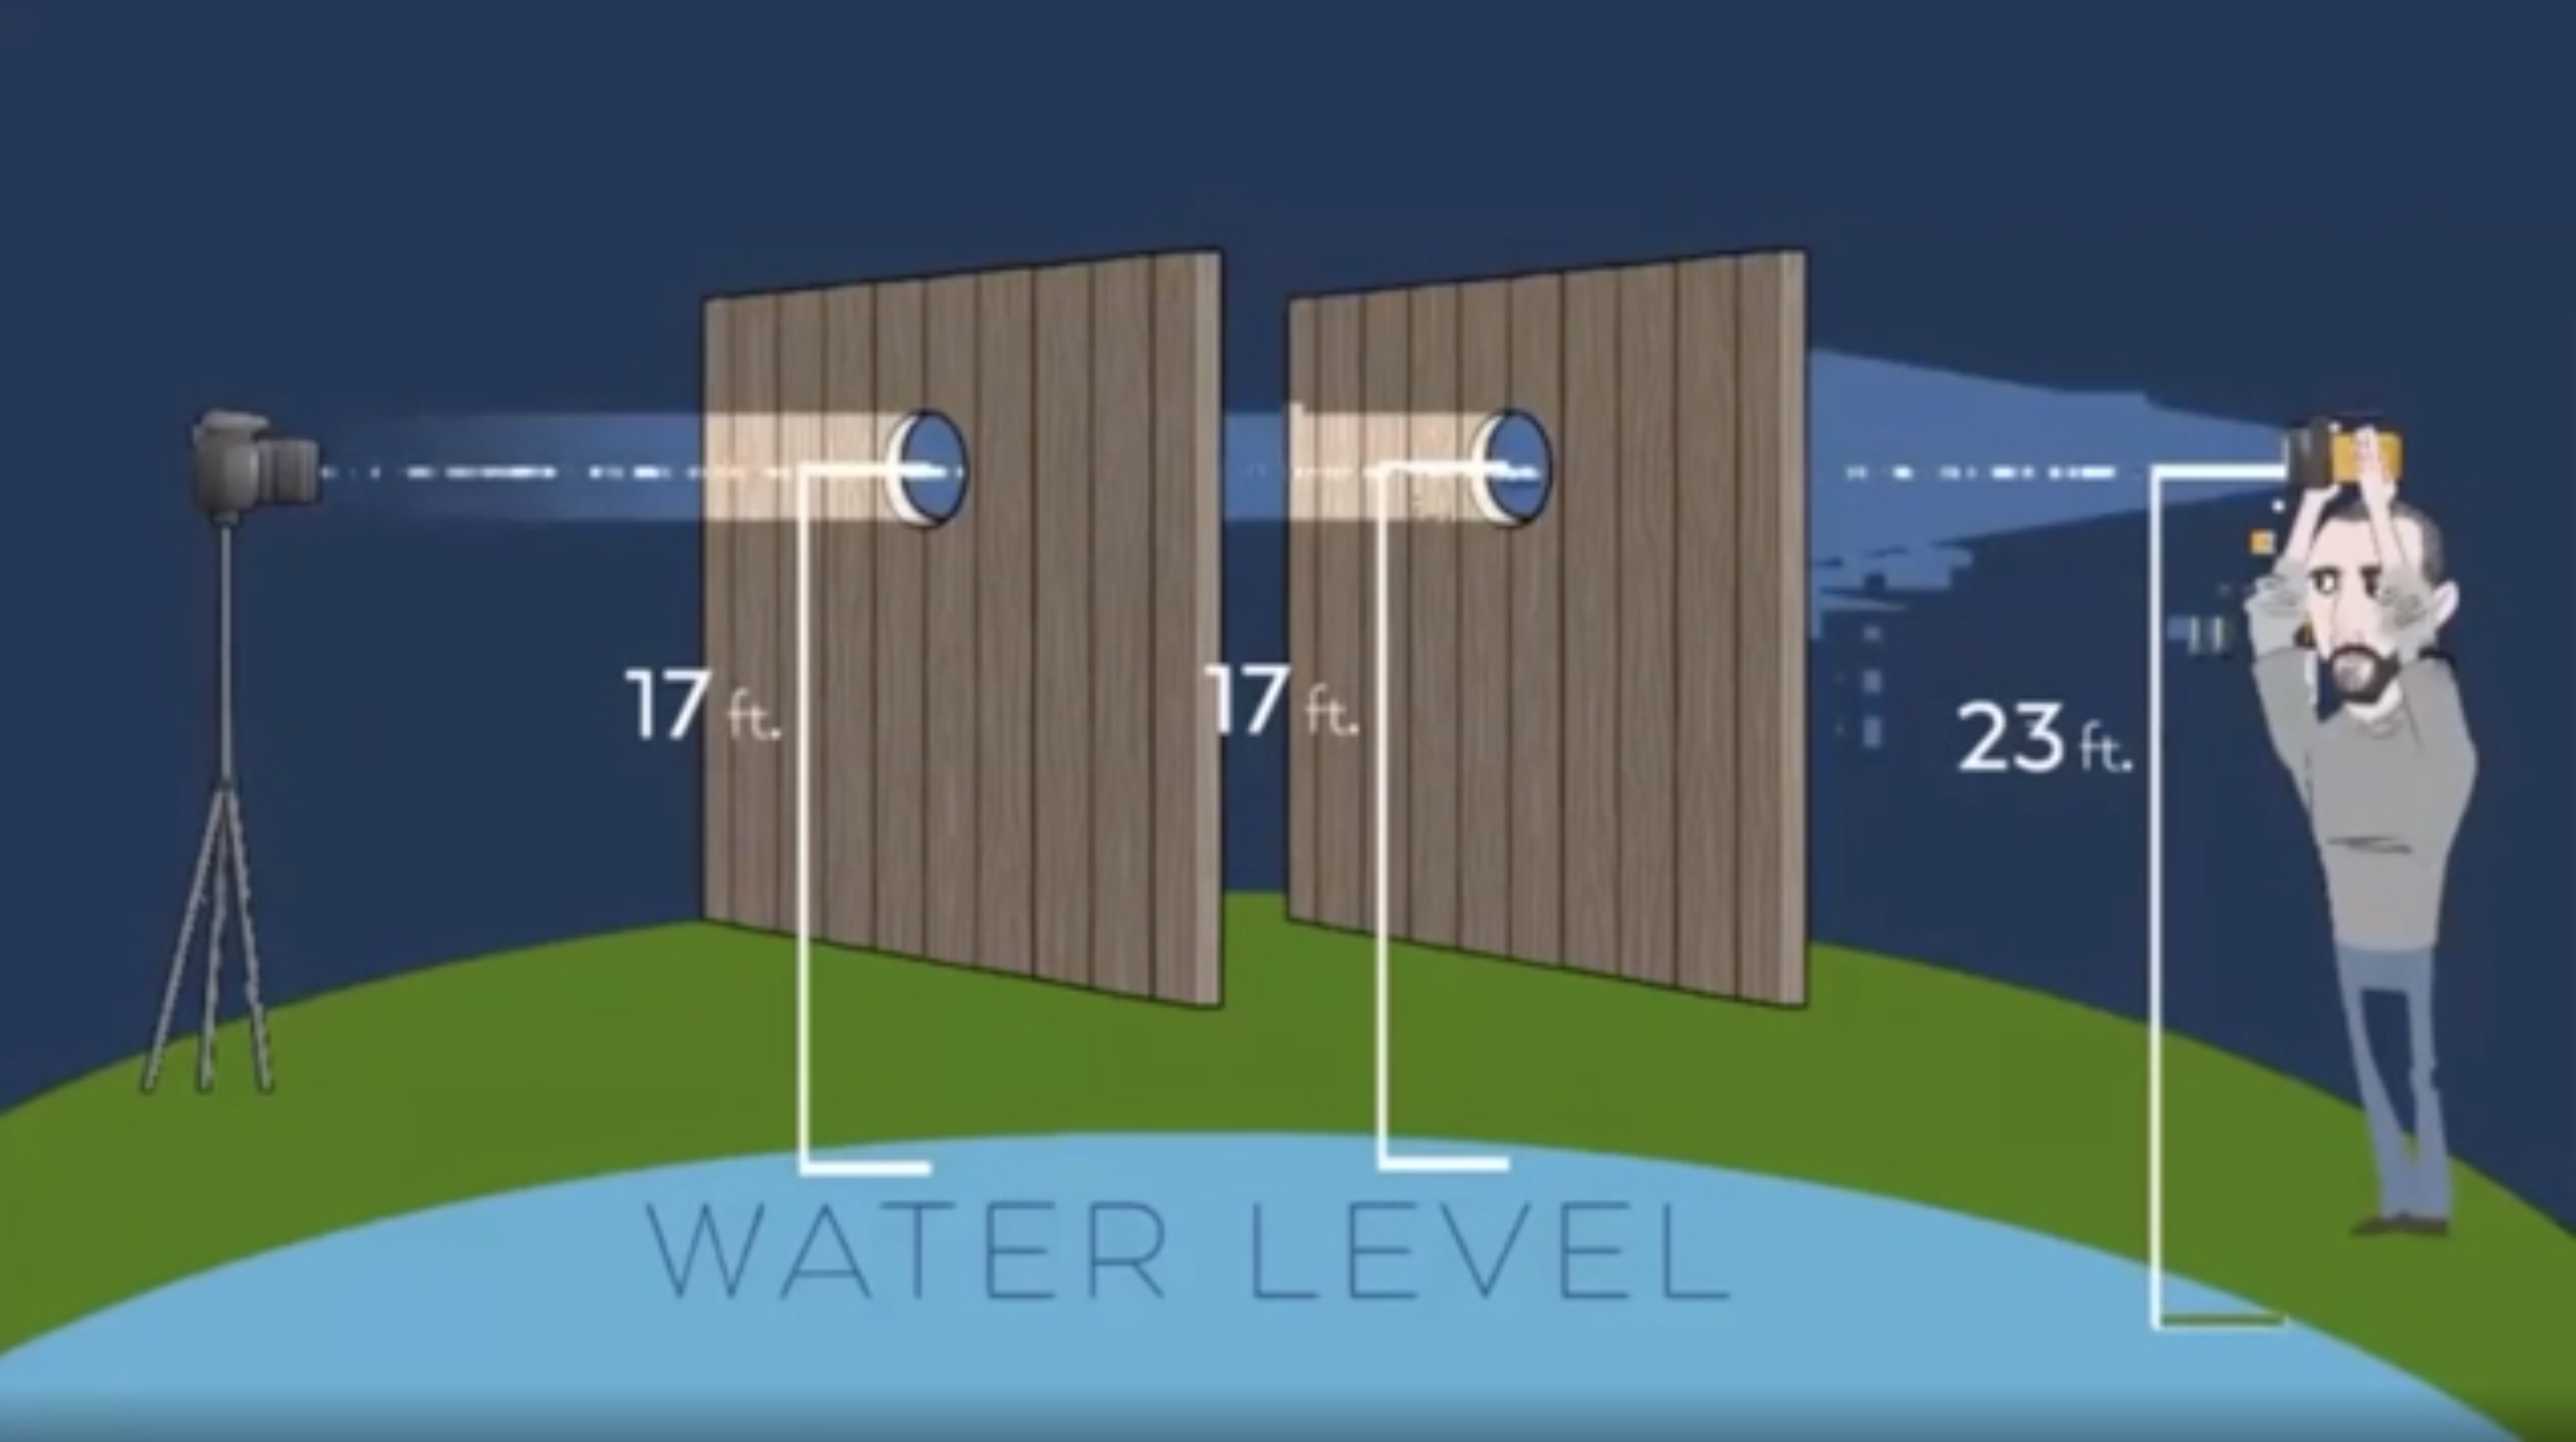 A diagram illustrating that if the person holds the light at 23 feet and cuts holes in the boards at 17 feet, then the light can only pass through the holes if the Earth is curved